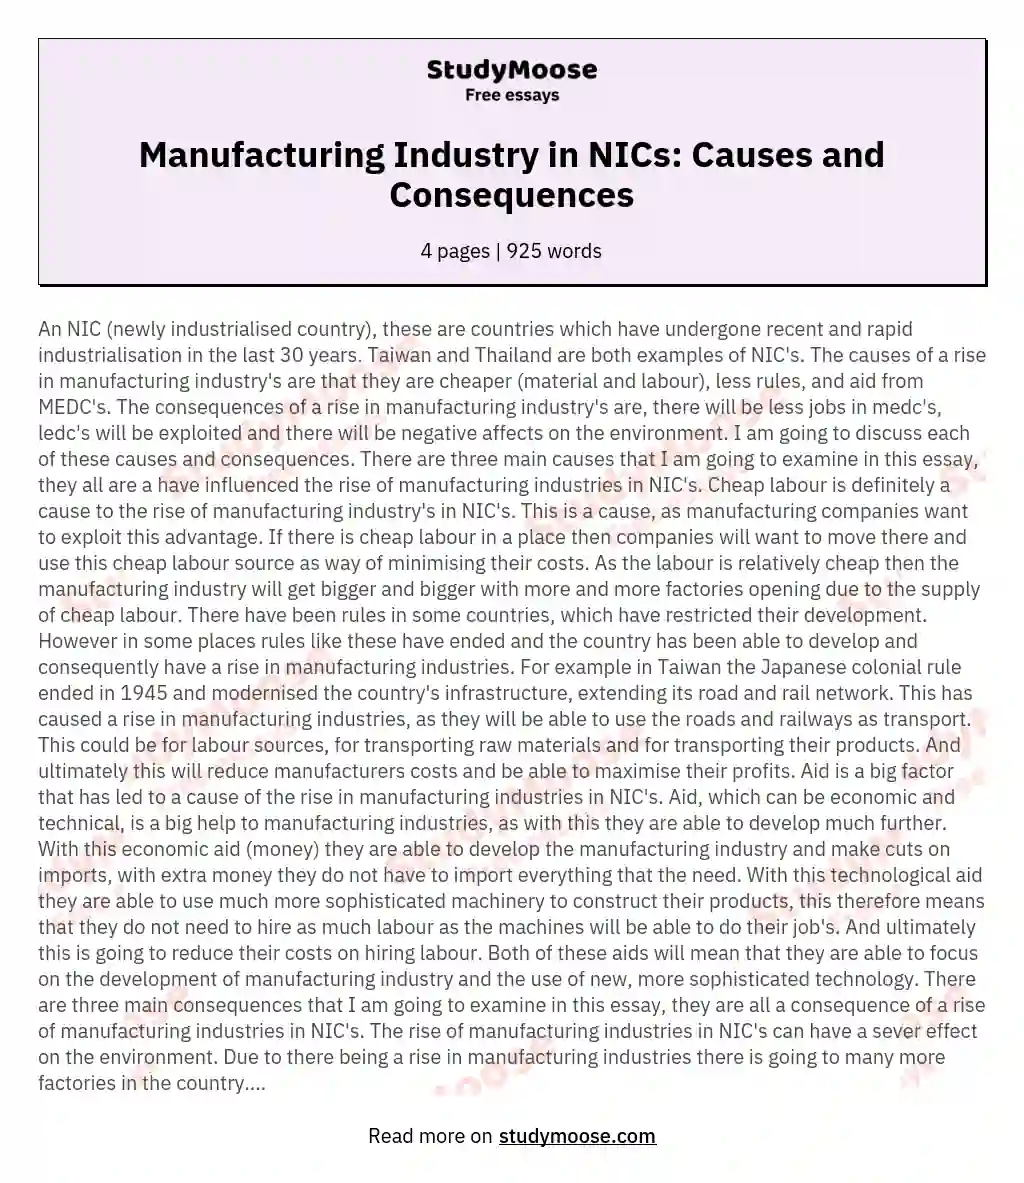 Manufacturing Industry in NICs: Causes and Consequences essay